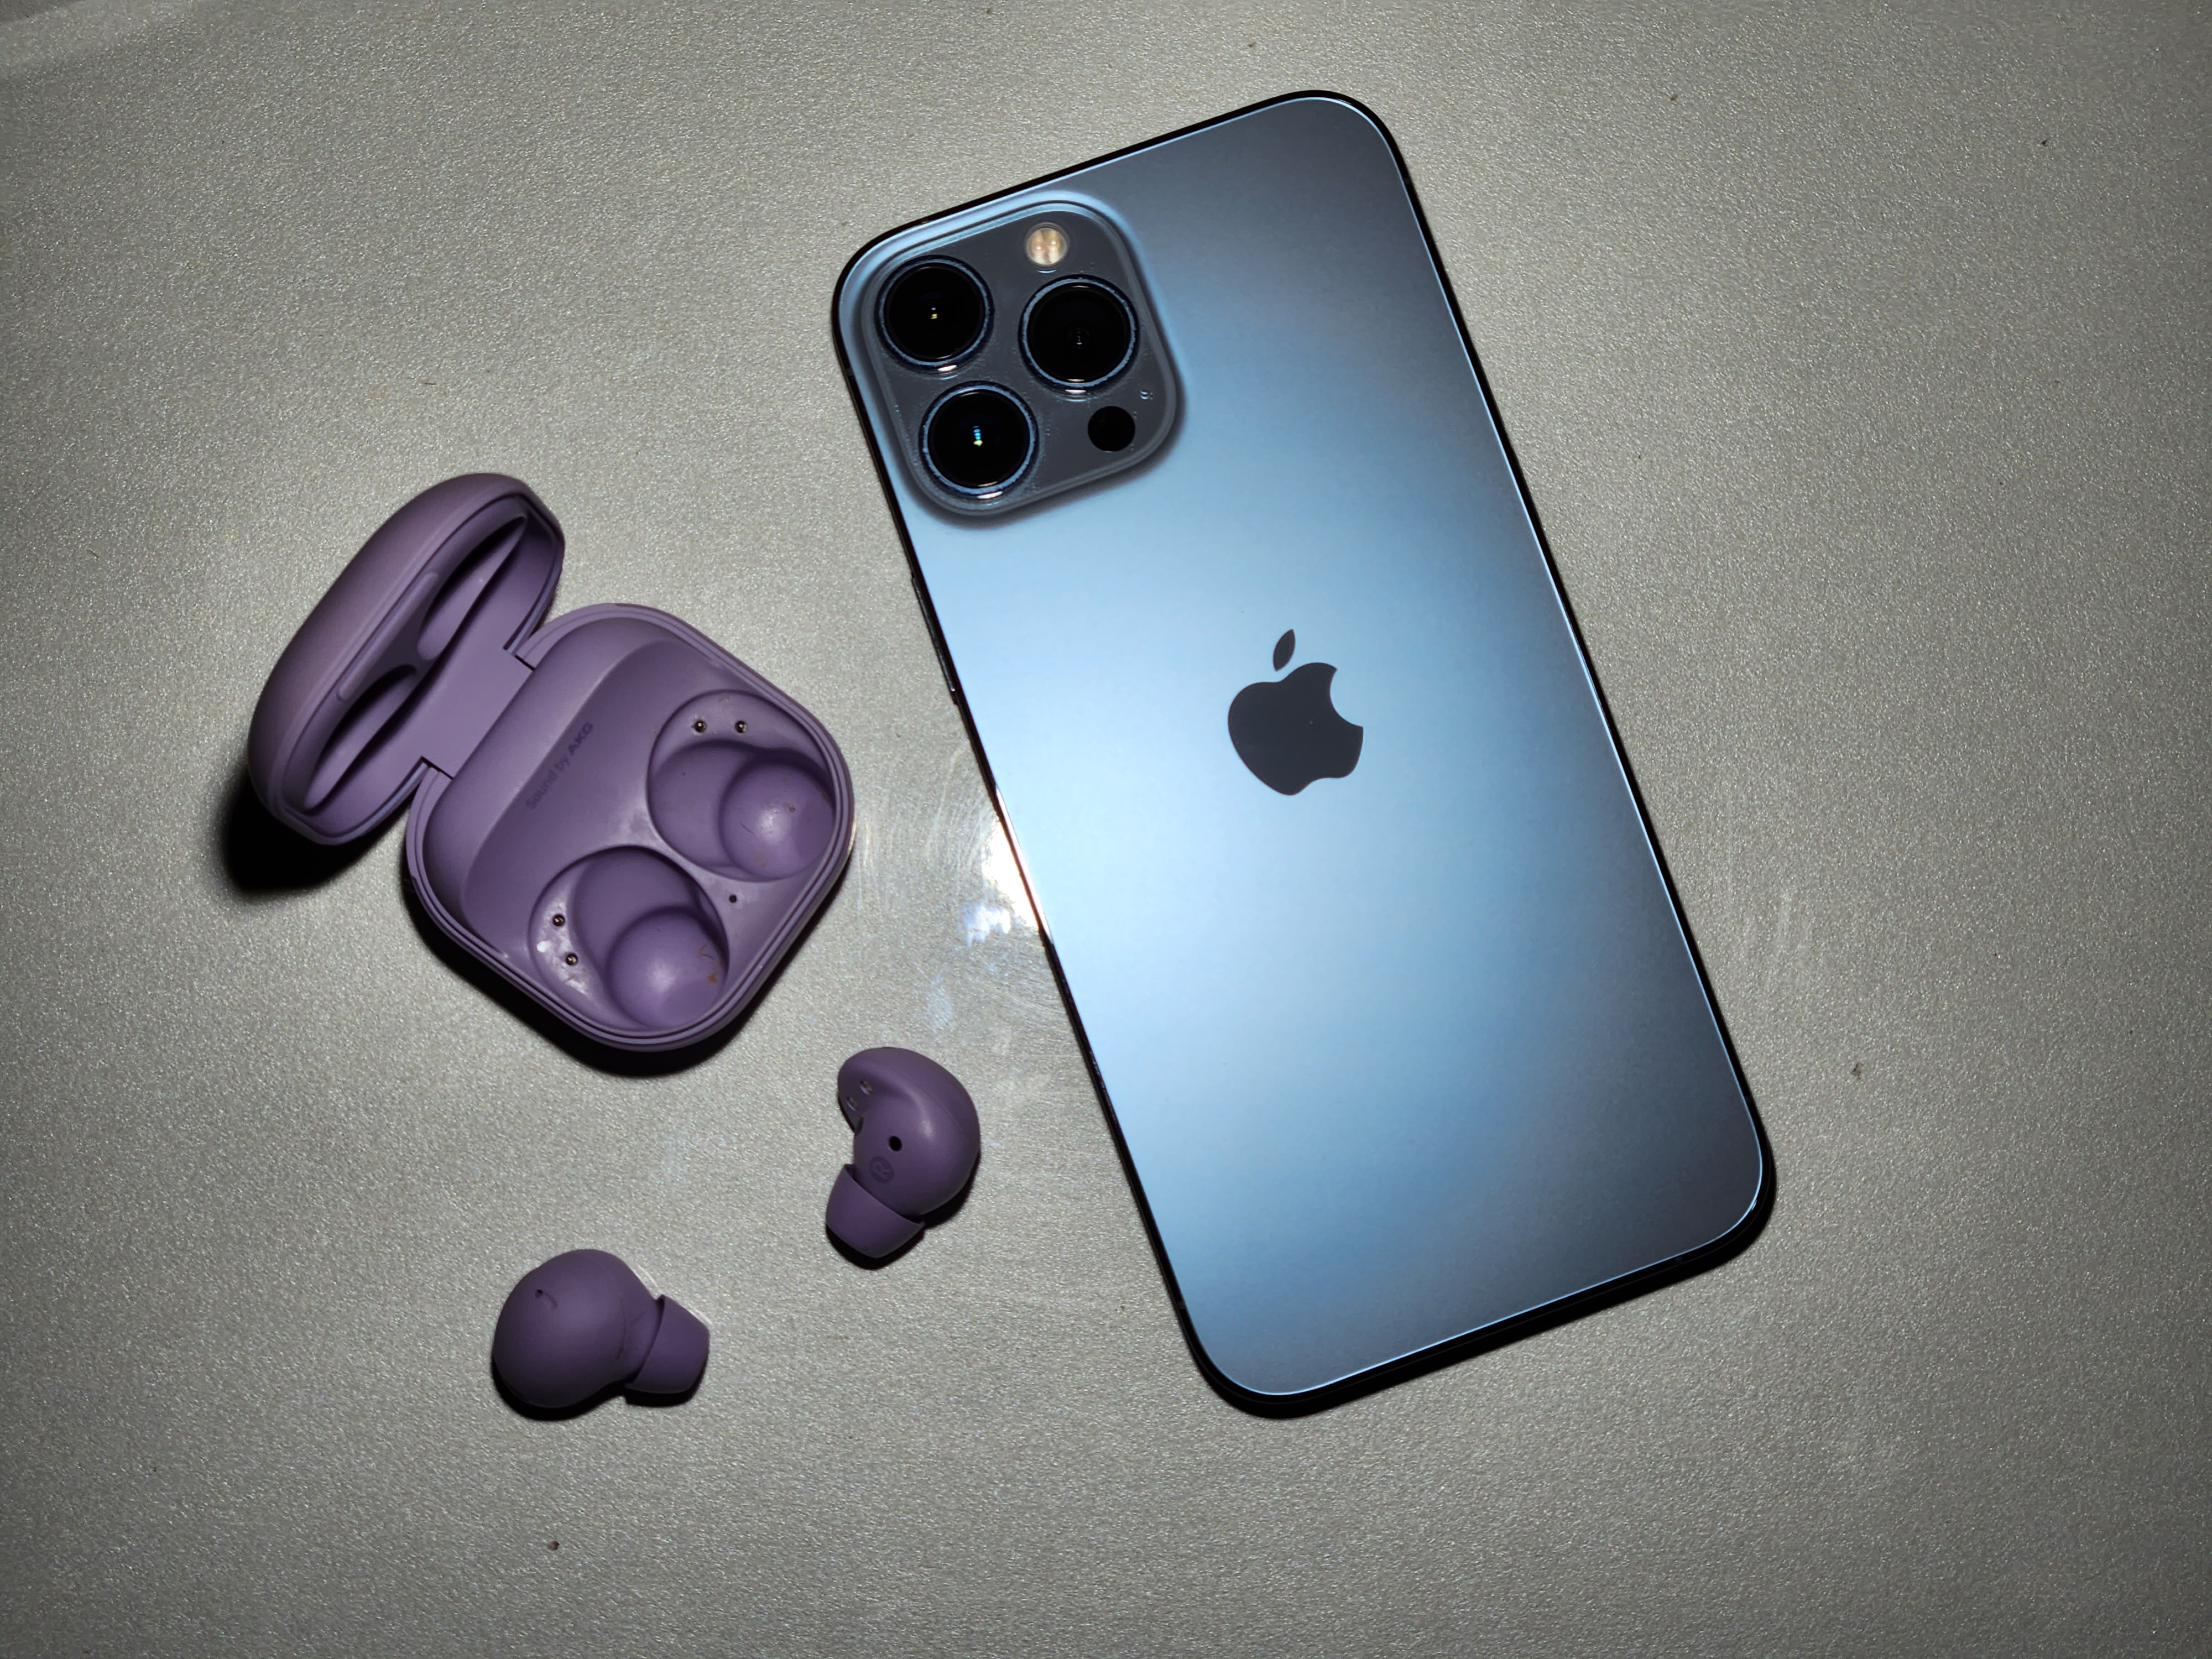 Galaxy Buds 2 Pro with iPhone 13 Pro Max on a table